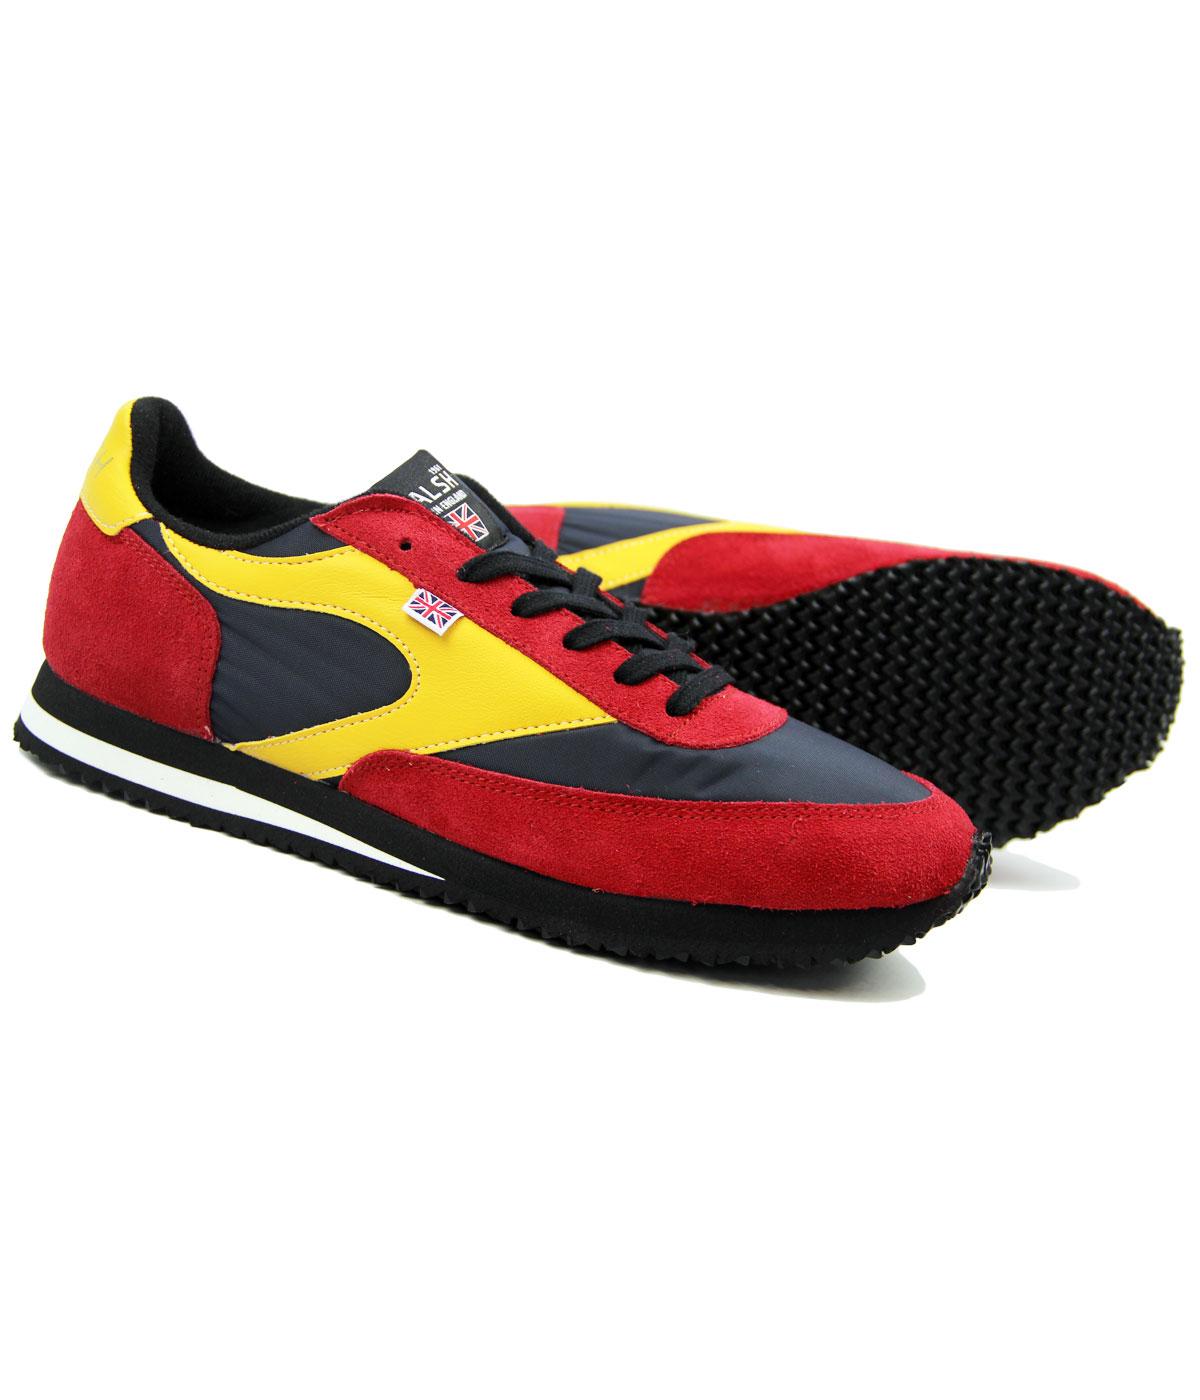 LA 84 NORMAN WALSH Mod Retro Trainers in Navy/Red/Yellow